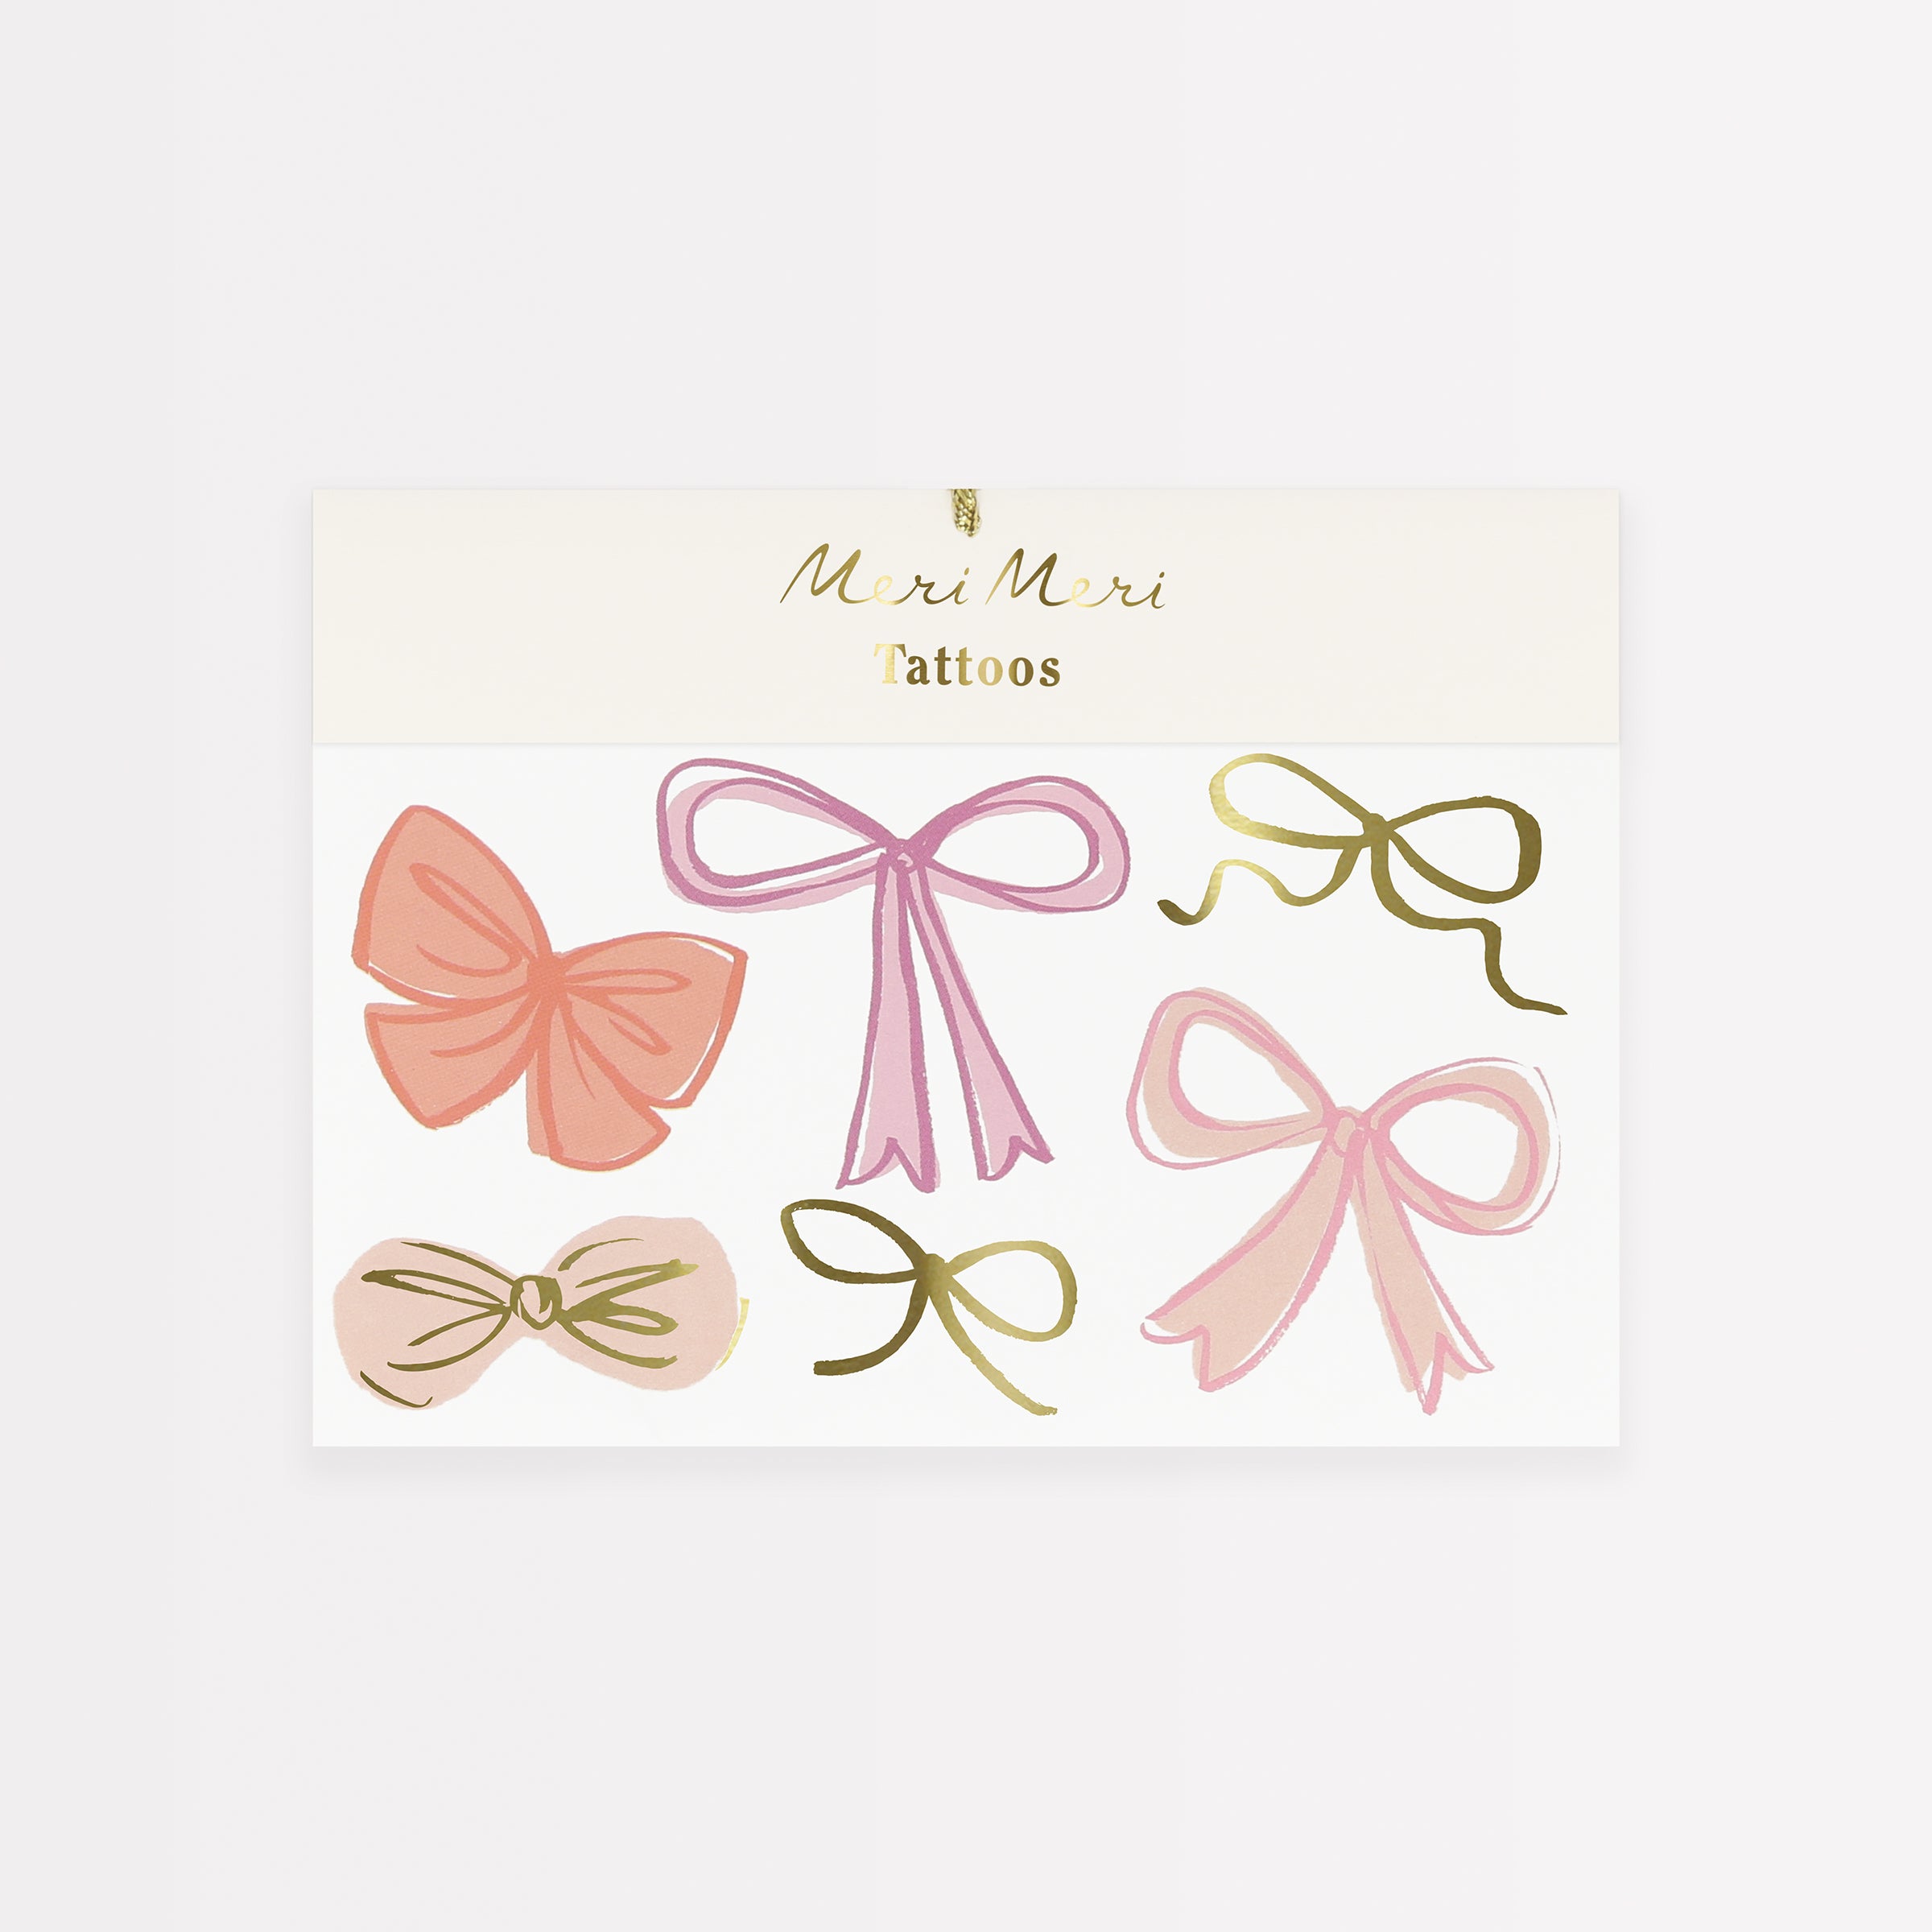 Our pink bow tattoos are wonderful kids temporary tattoos for a stylish party look.